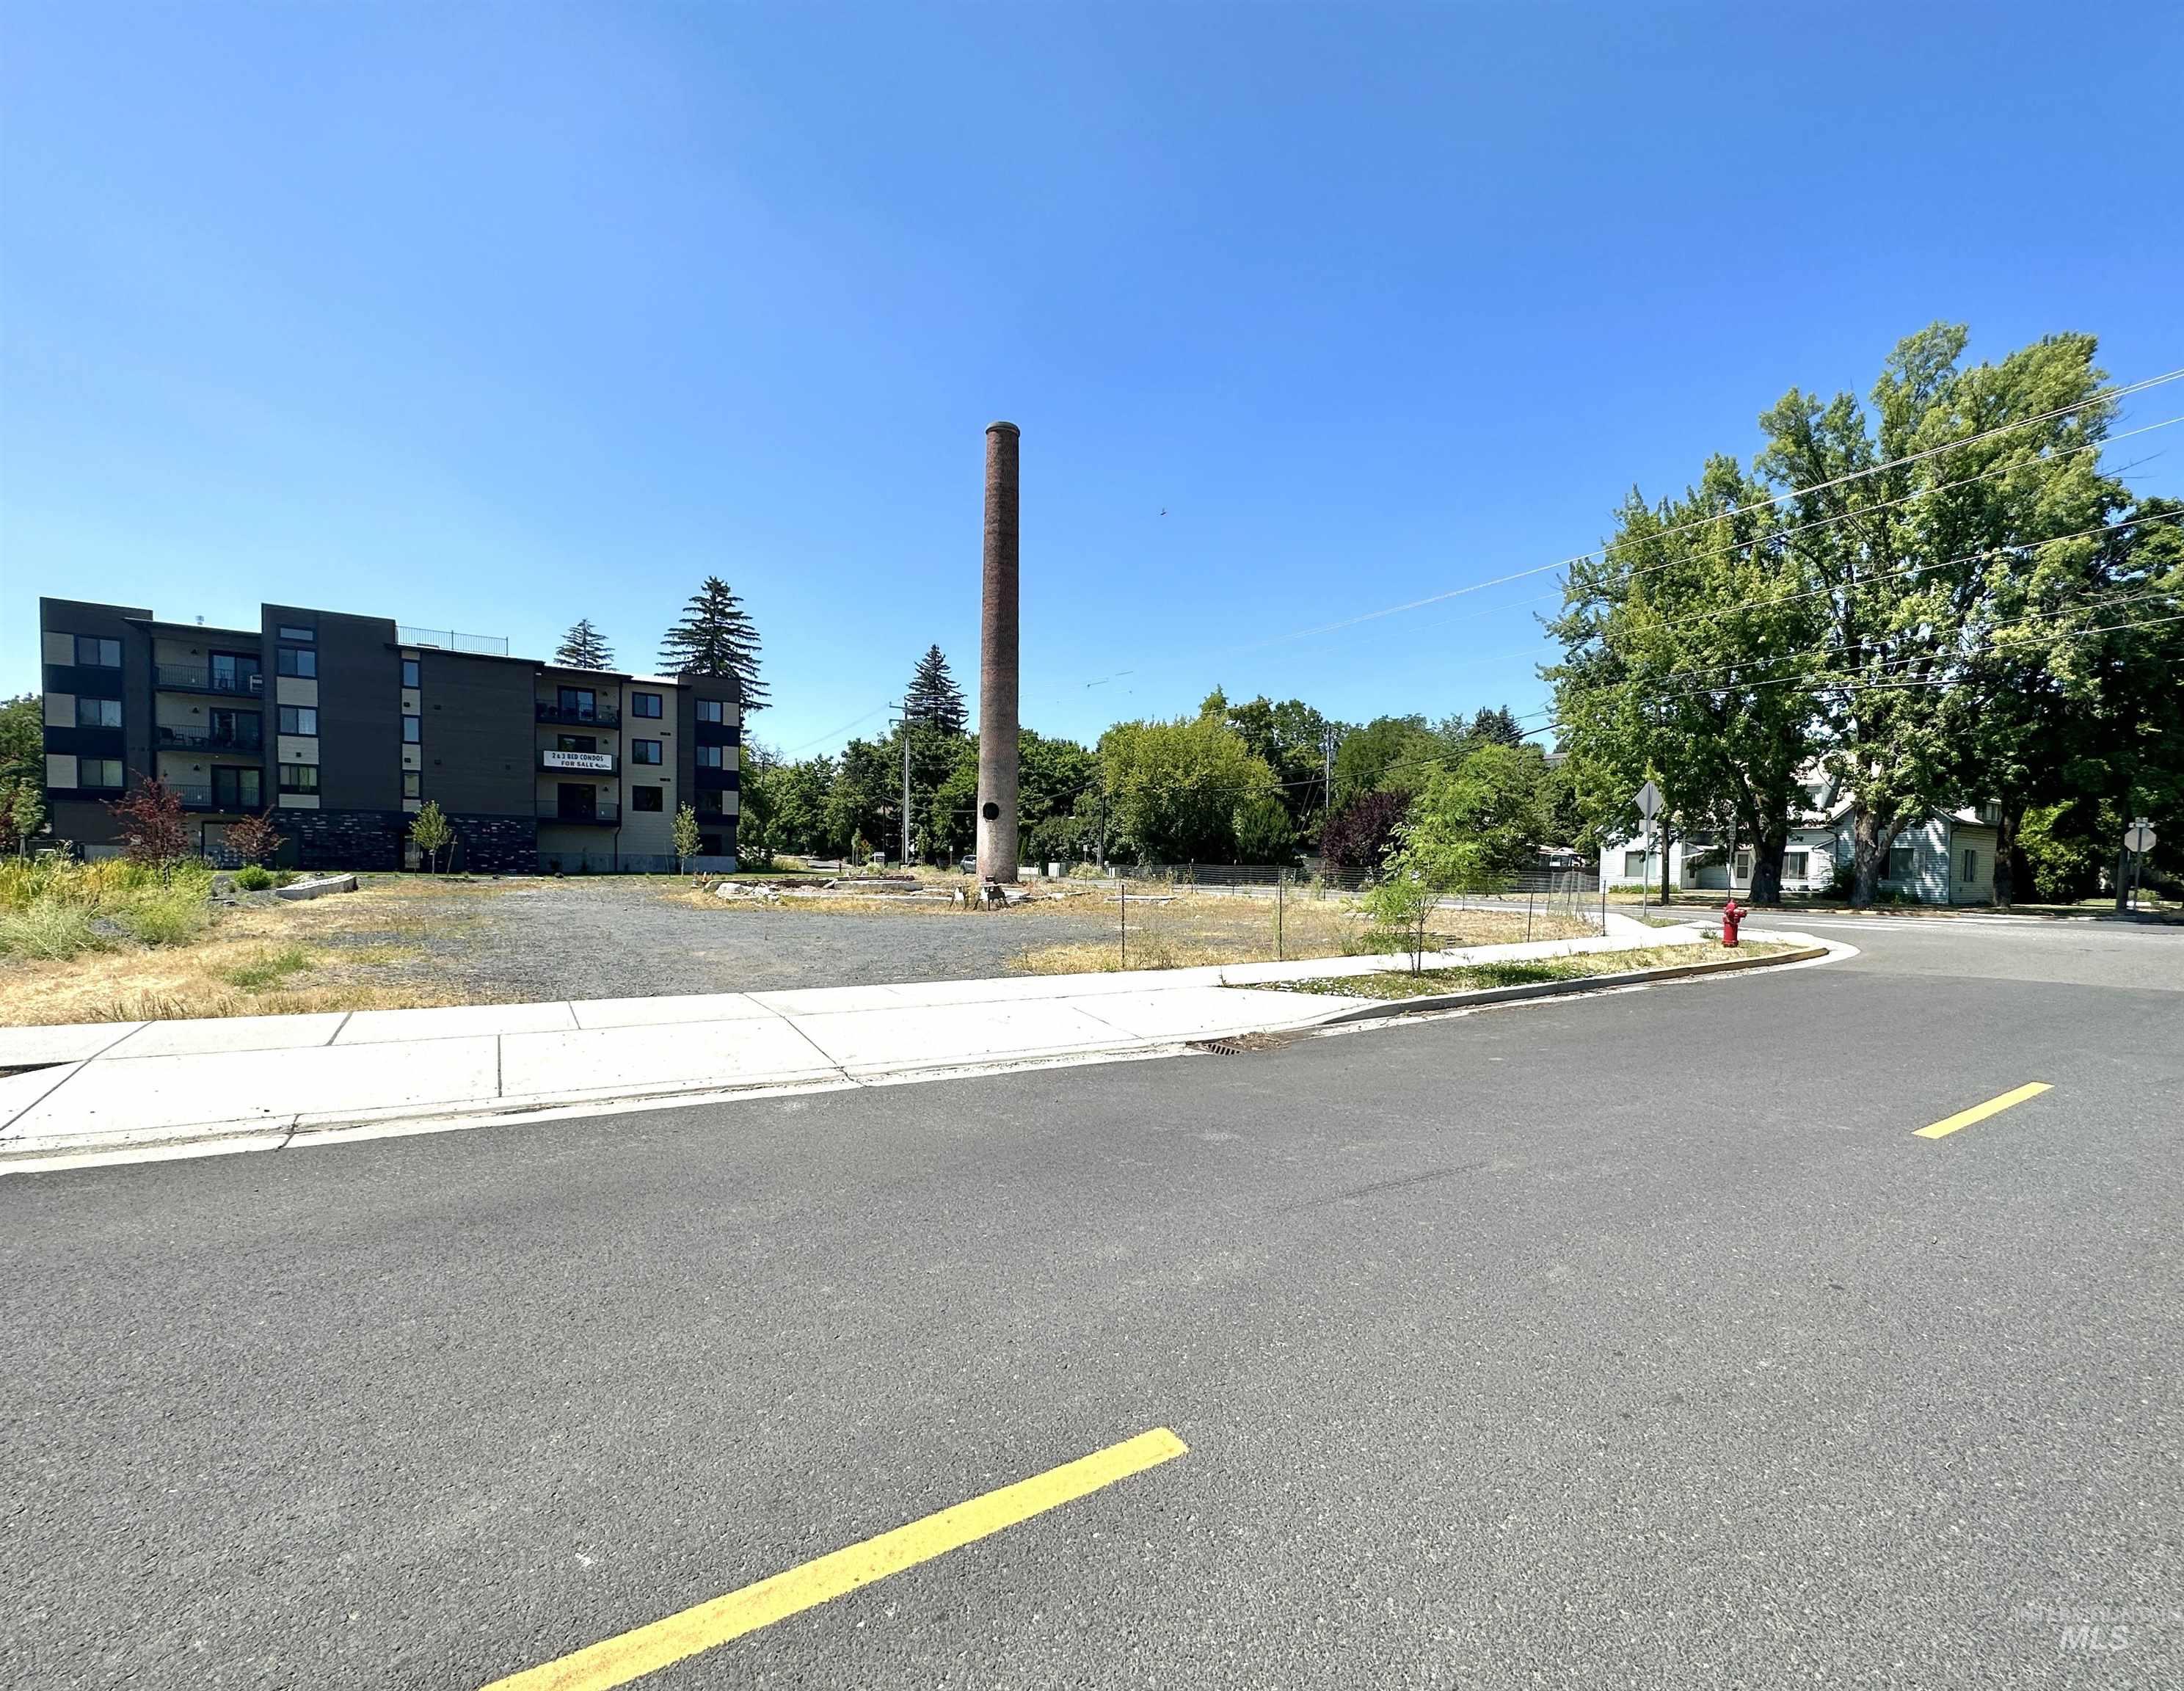 123 N Almon, Moscow, Idaho 83843, Land For Sale, Price $350,000,MLS 98883419